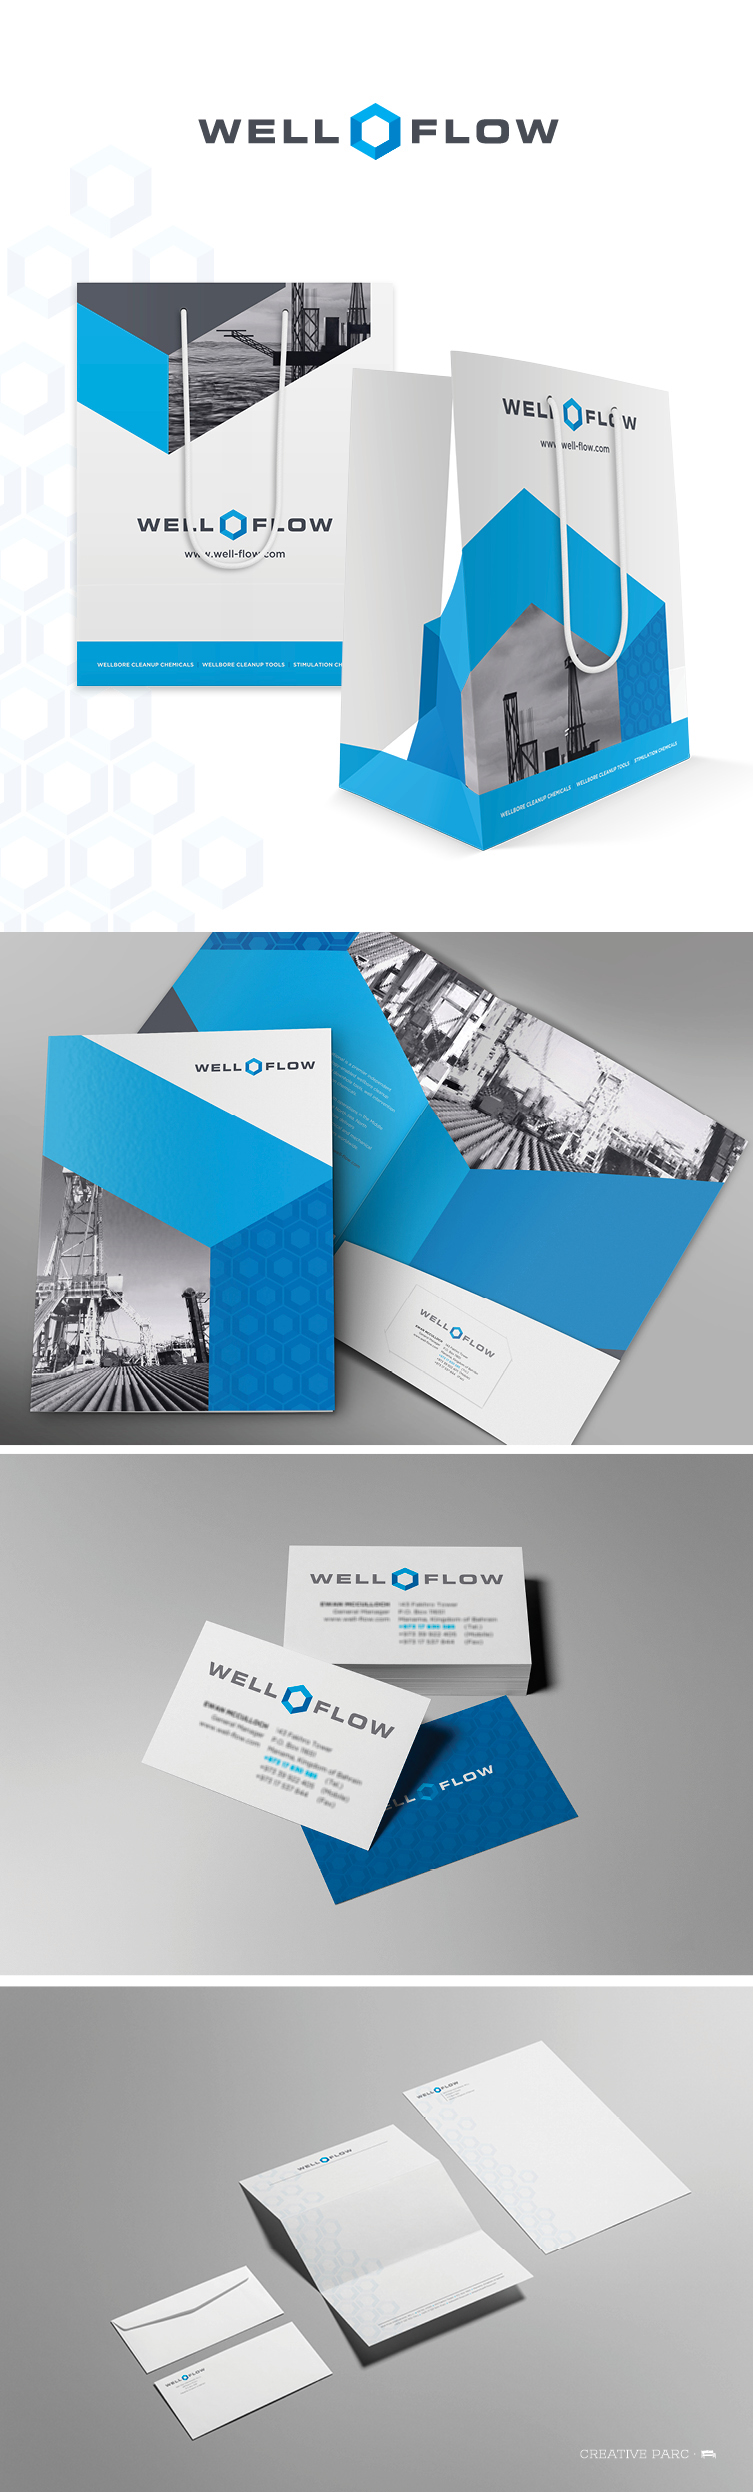 print collateral Stationery